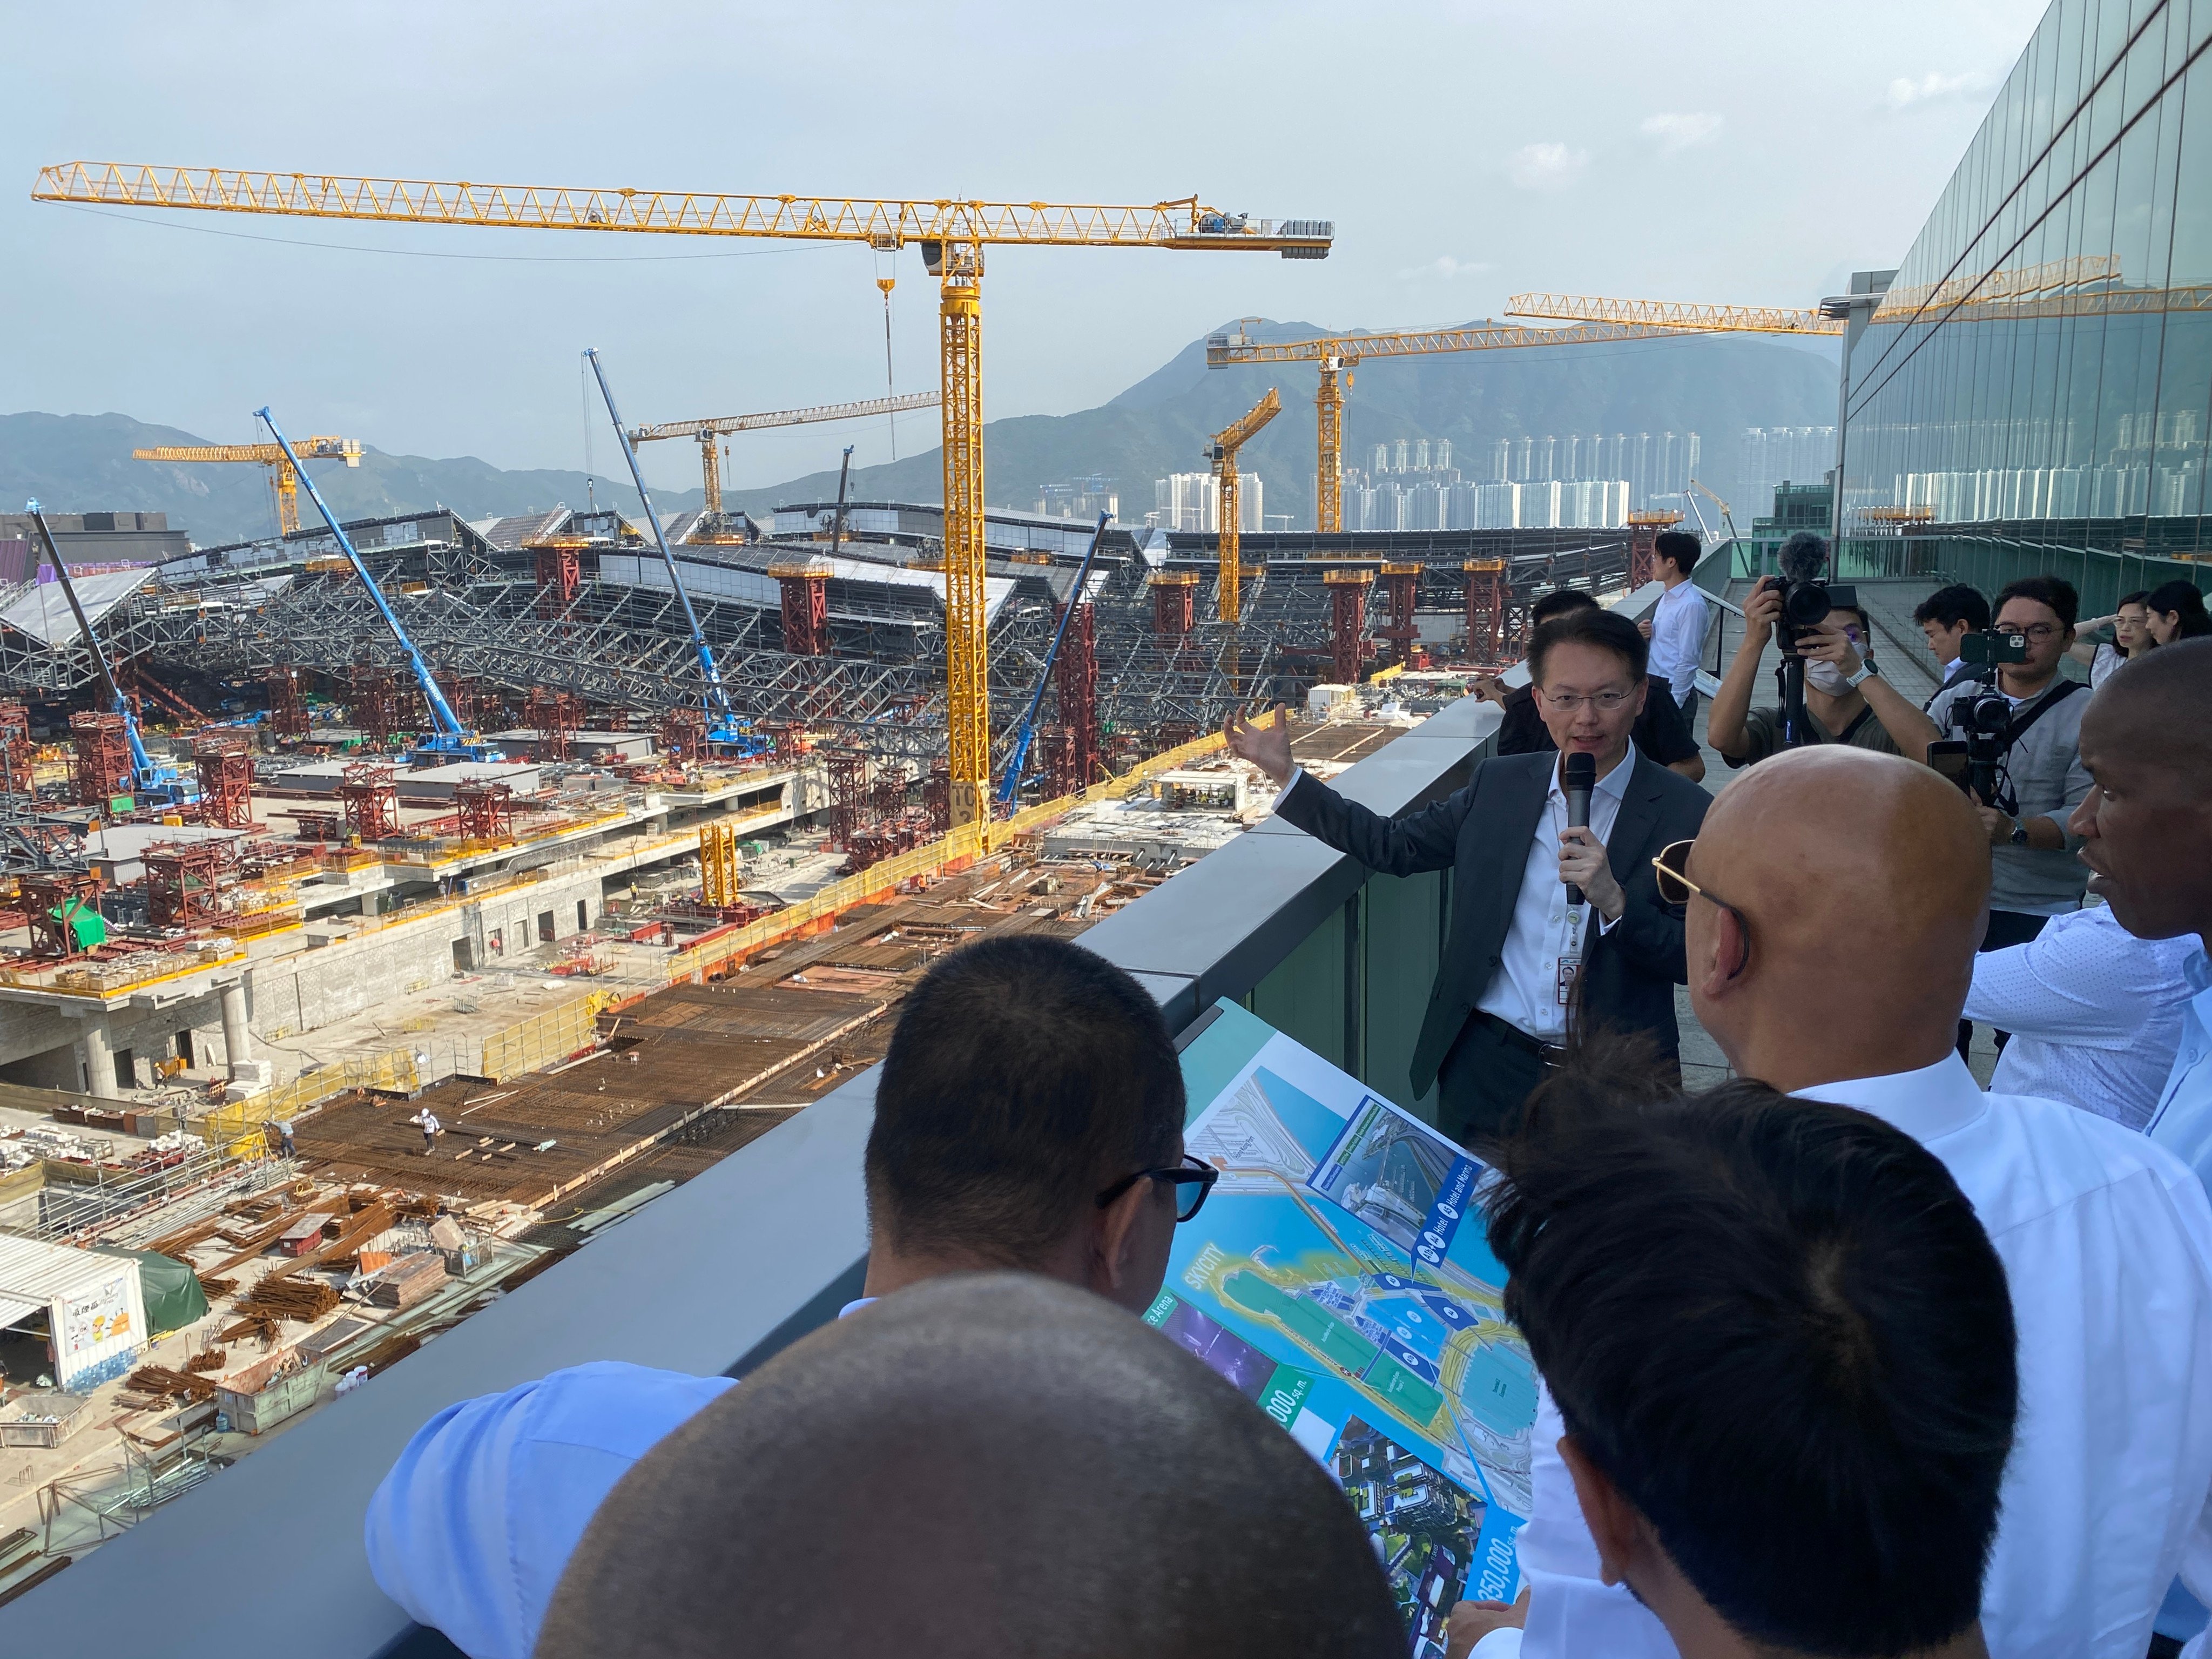 The ICAC held a pilot training programme for graft-busters from a number of countries last month. The course included a tour to Guangdong, Zhuhai and Zhongshan, where the officers visited major infrastructure sites to learn how they were run. Photo: Handout